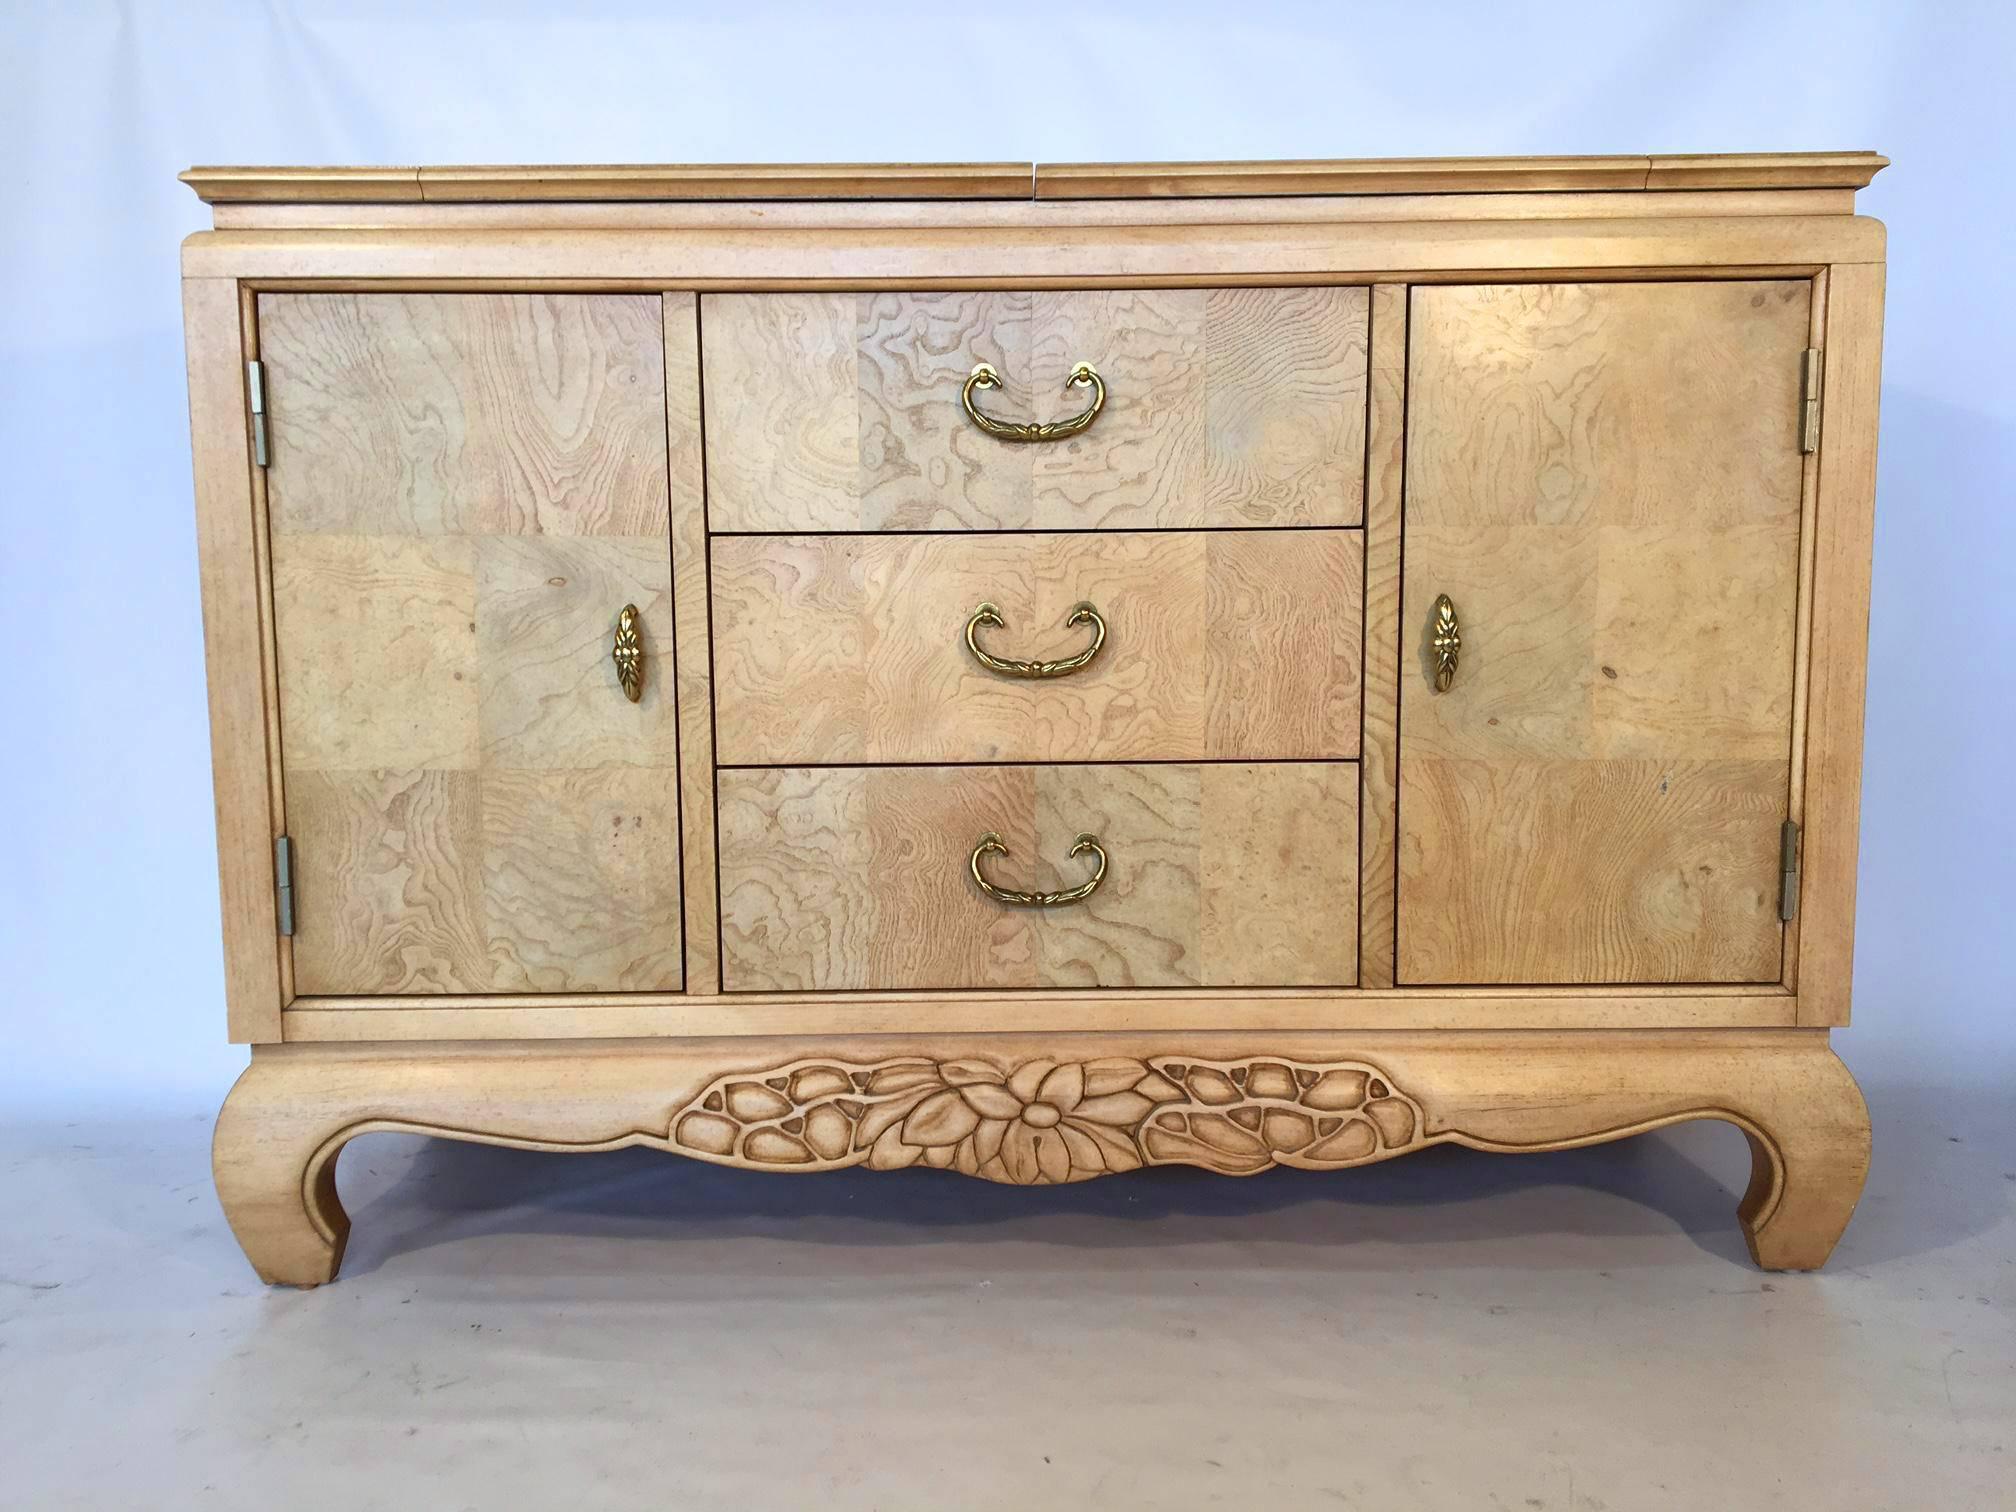 Asian style server buffet in light burl wood.
Created by Century Furniture Company.
Server sits atop Ming legs and features carved accents and brass hardware.
Three middle drawers flanked with side doors revealing storage and shelving.
Very good